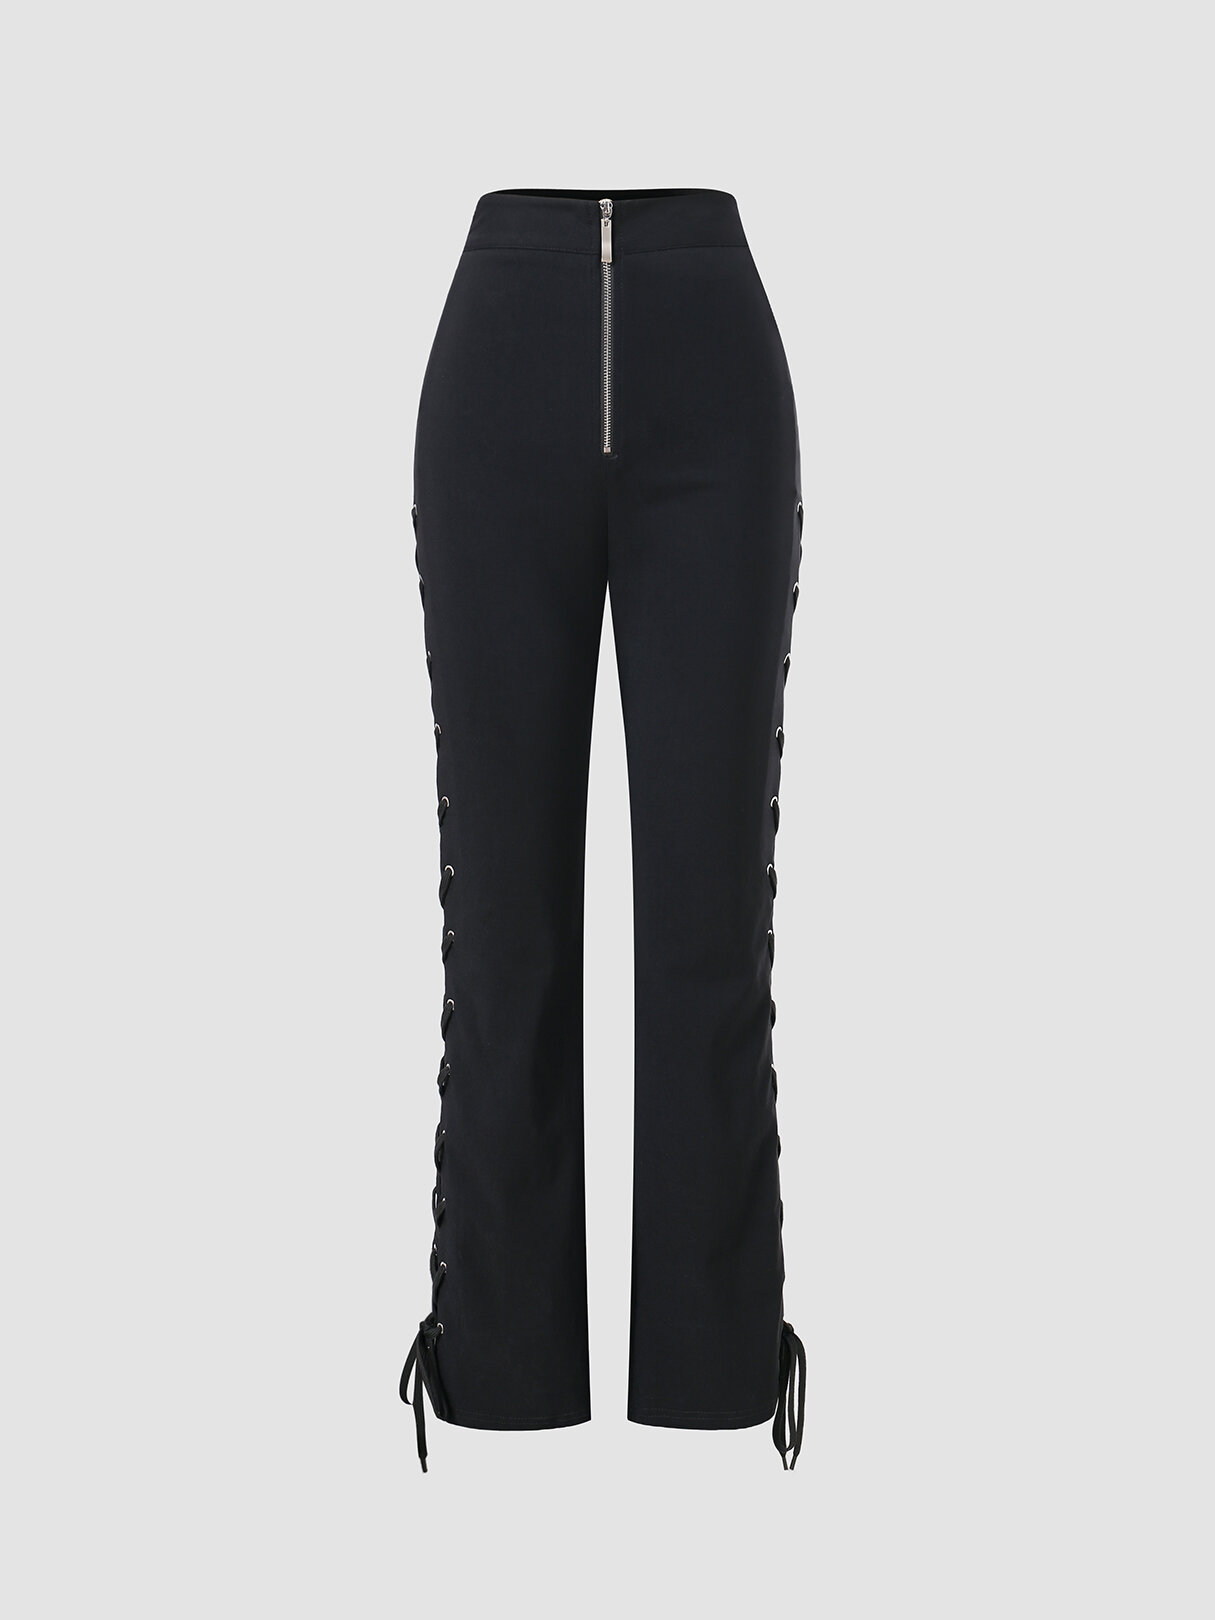 Solid Two Sides Lace Up Hollow Zip Front Pants